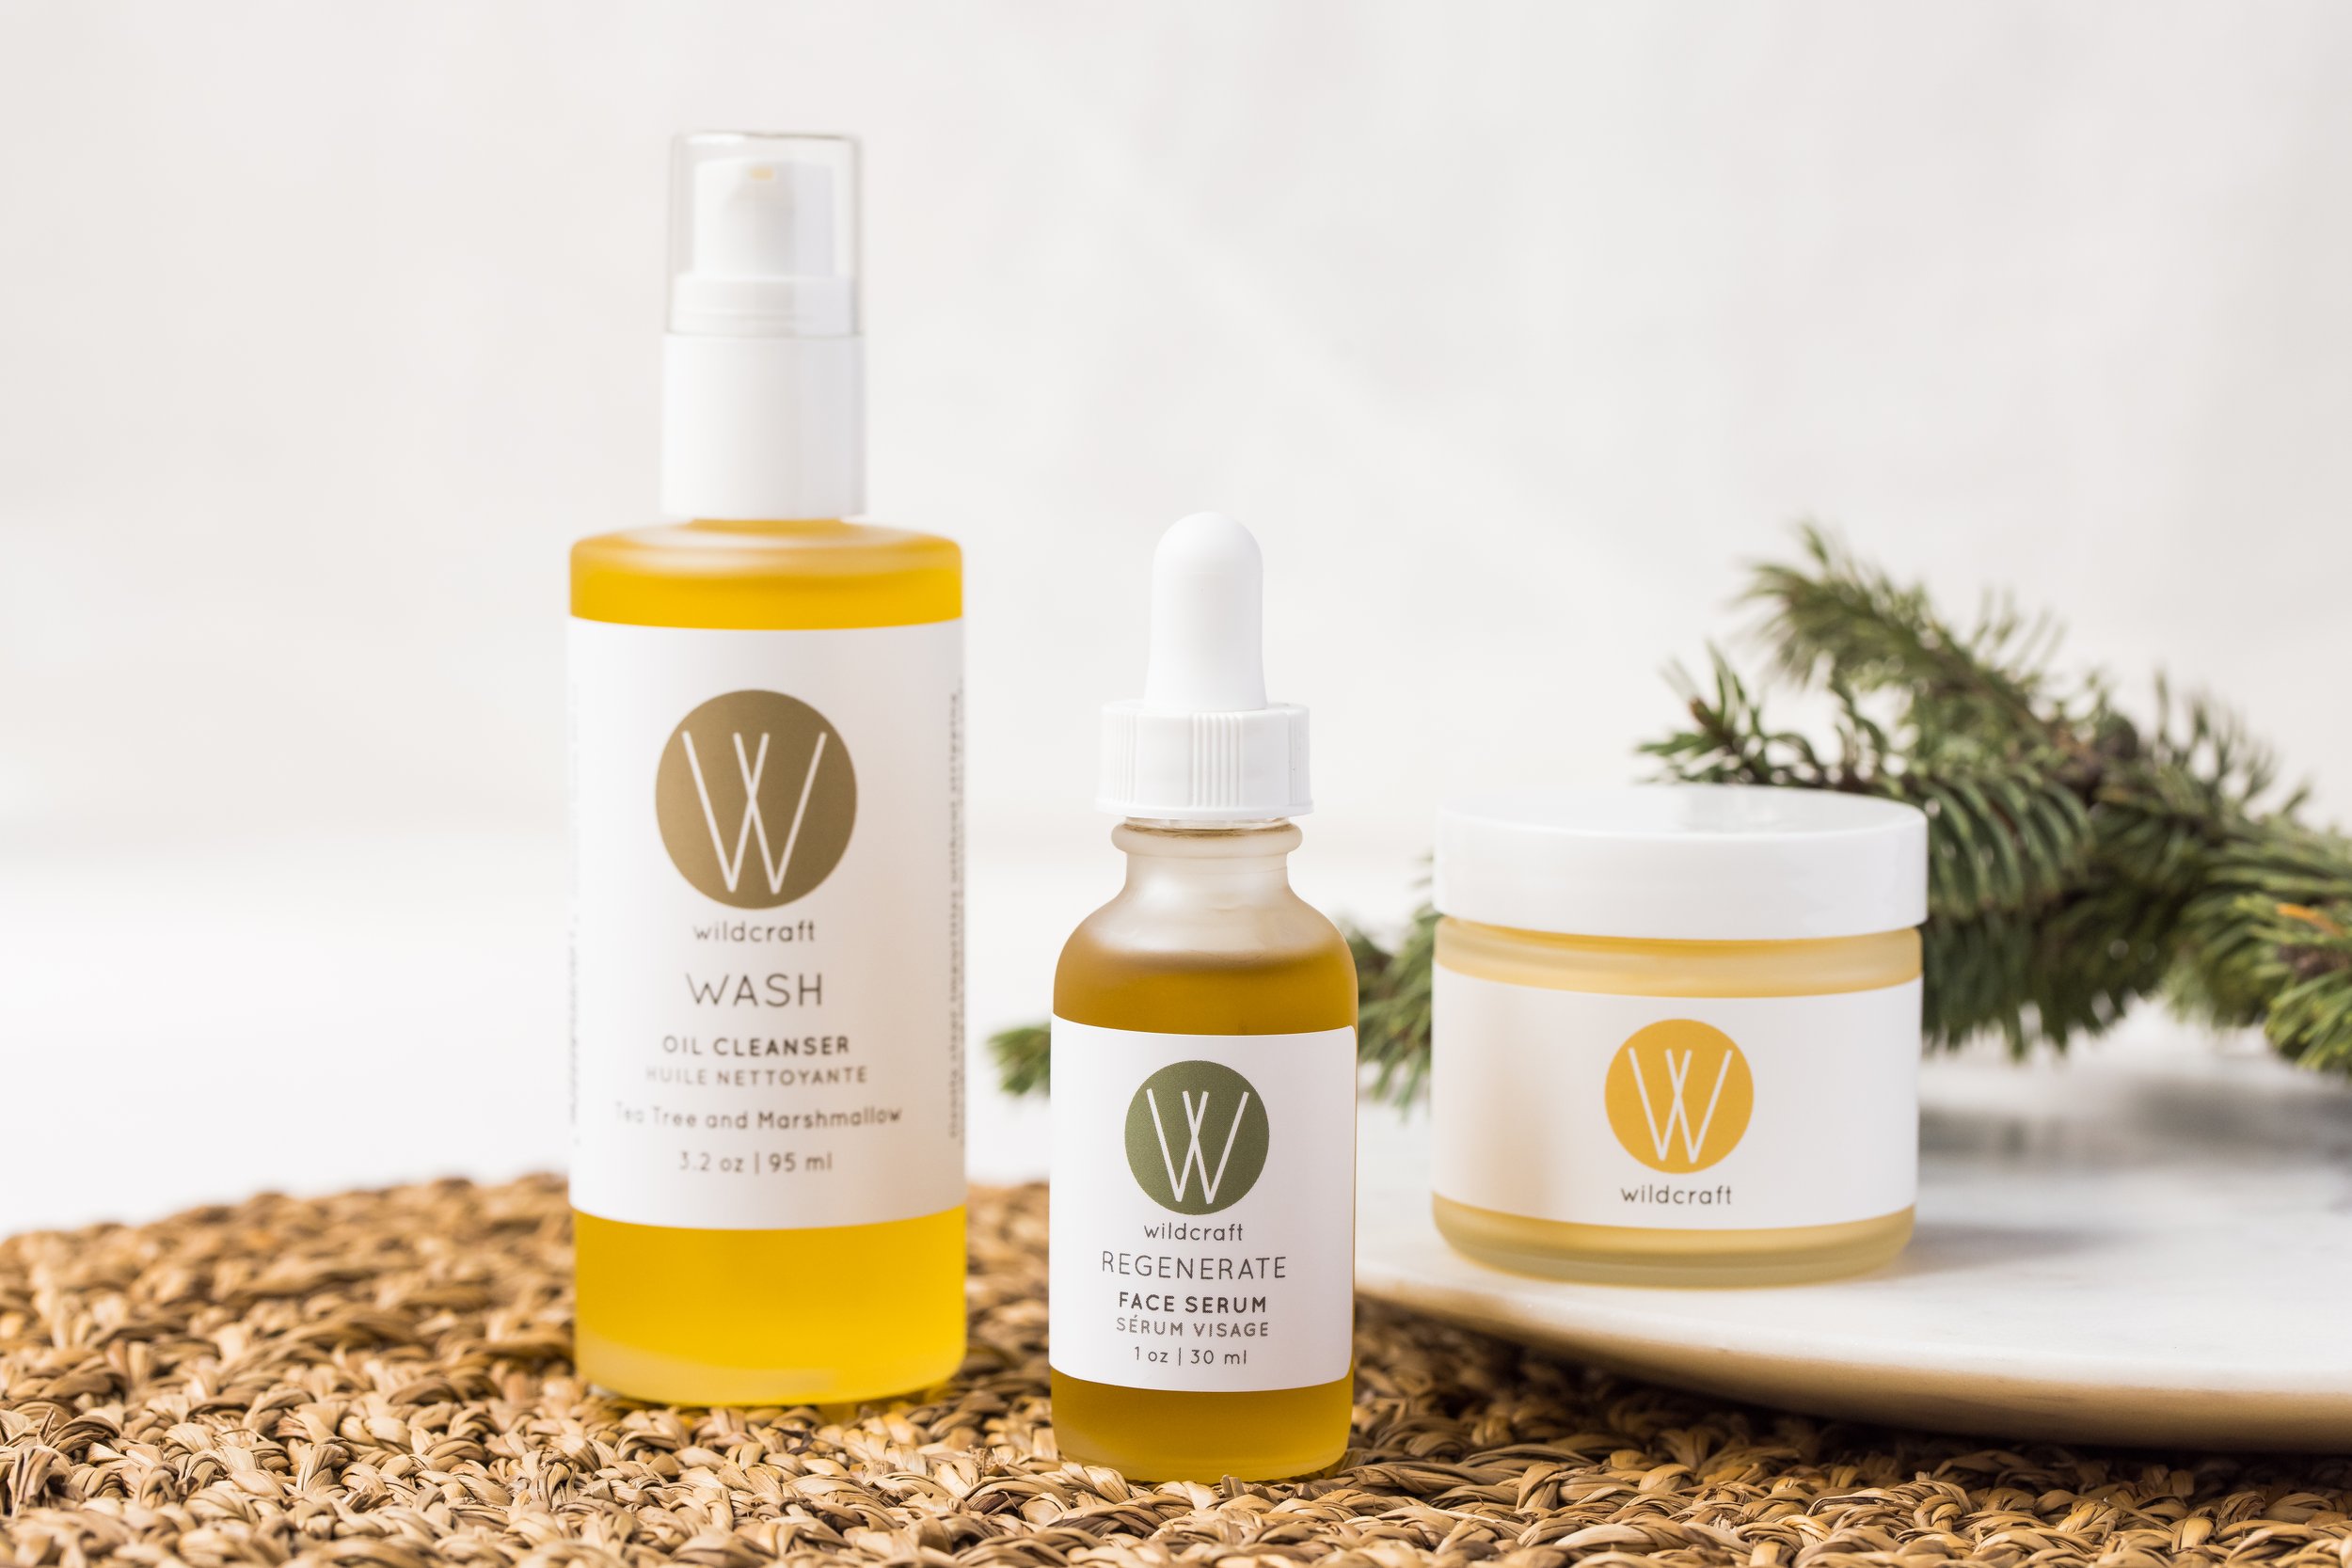 Wildcraft Skincare Products - $22.00 - $28.00